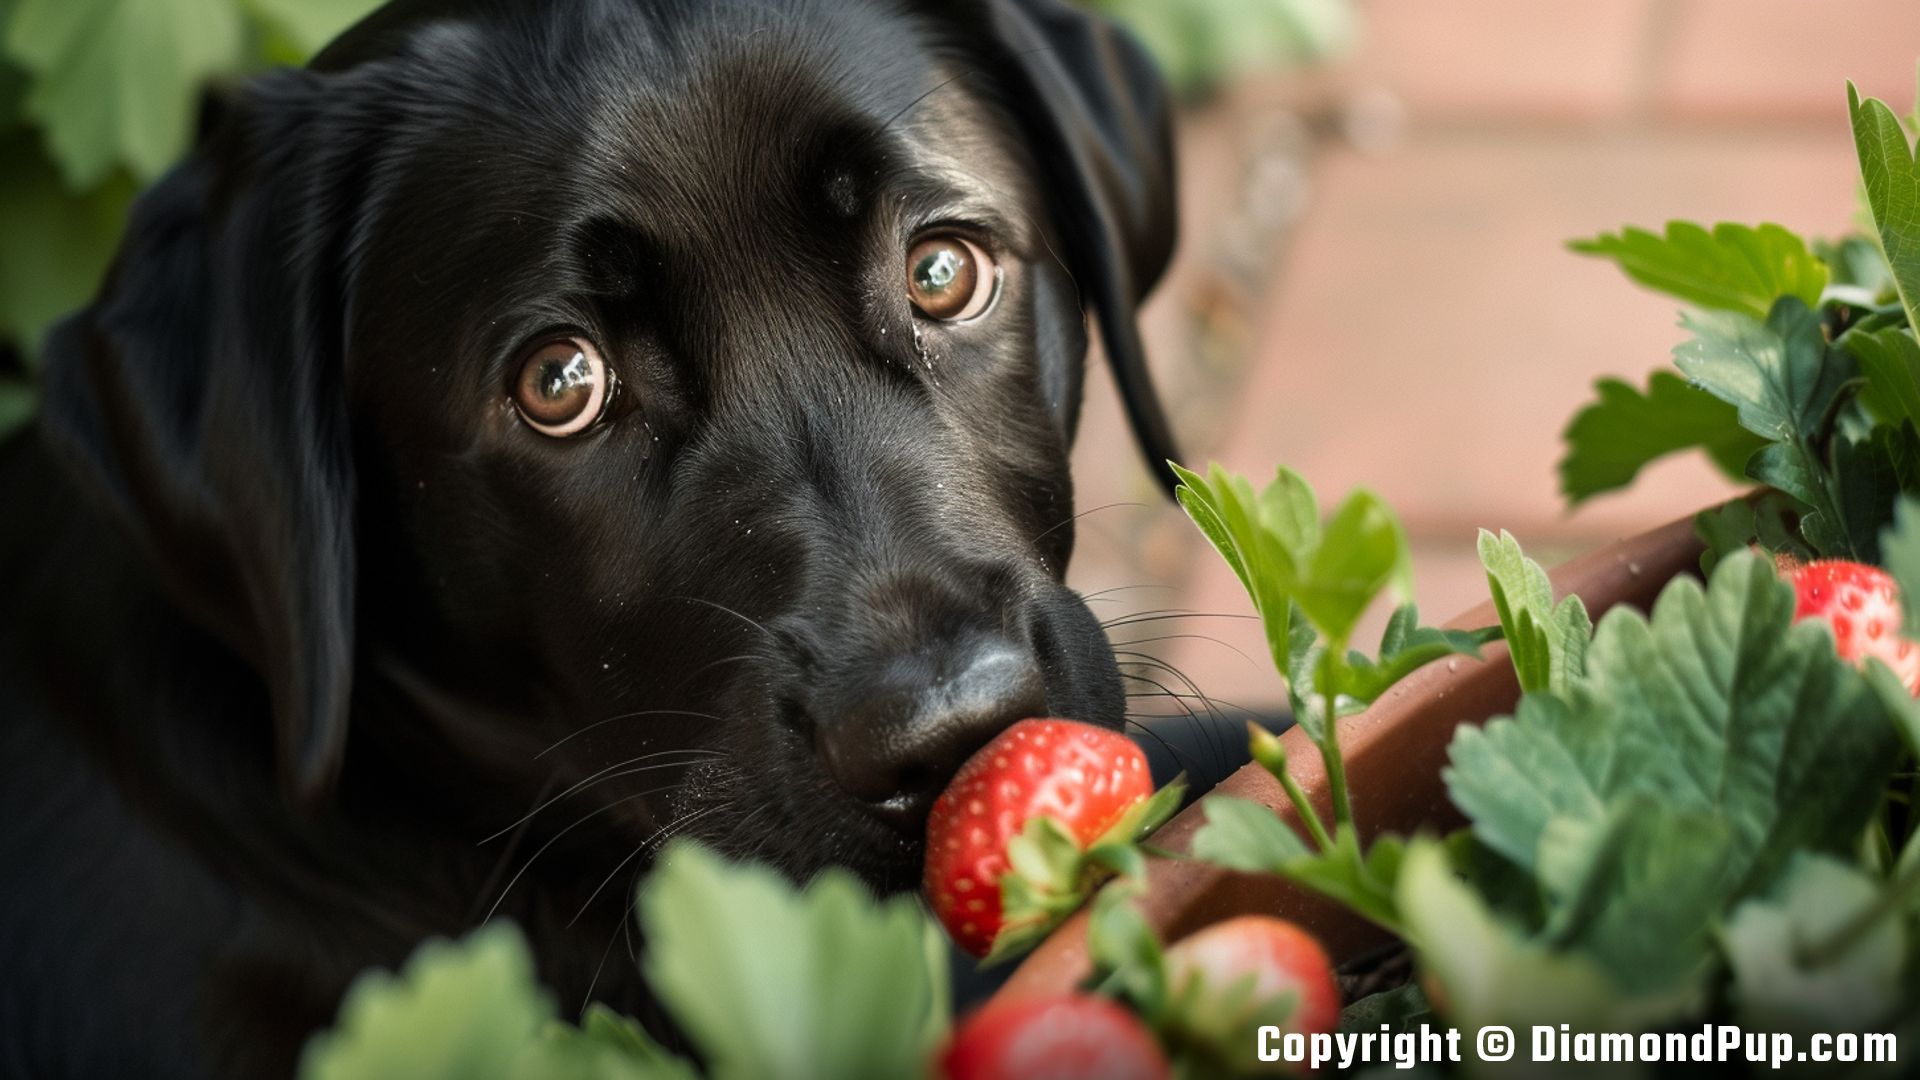 Image of a Cute Labrador Snacking on Strawberries